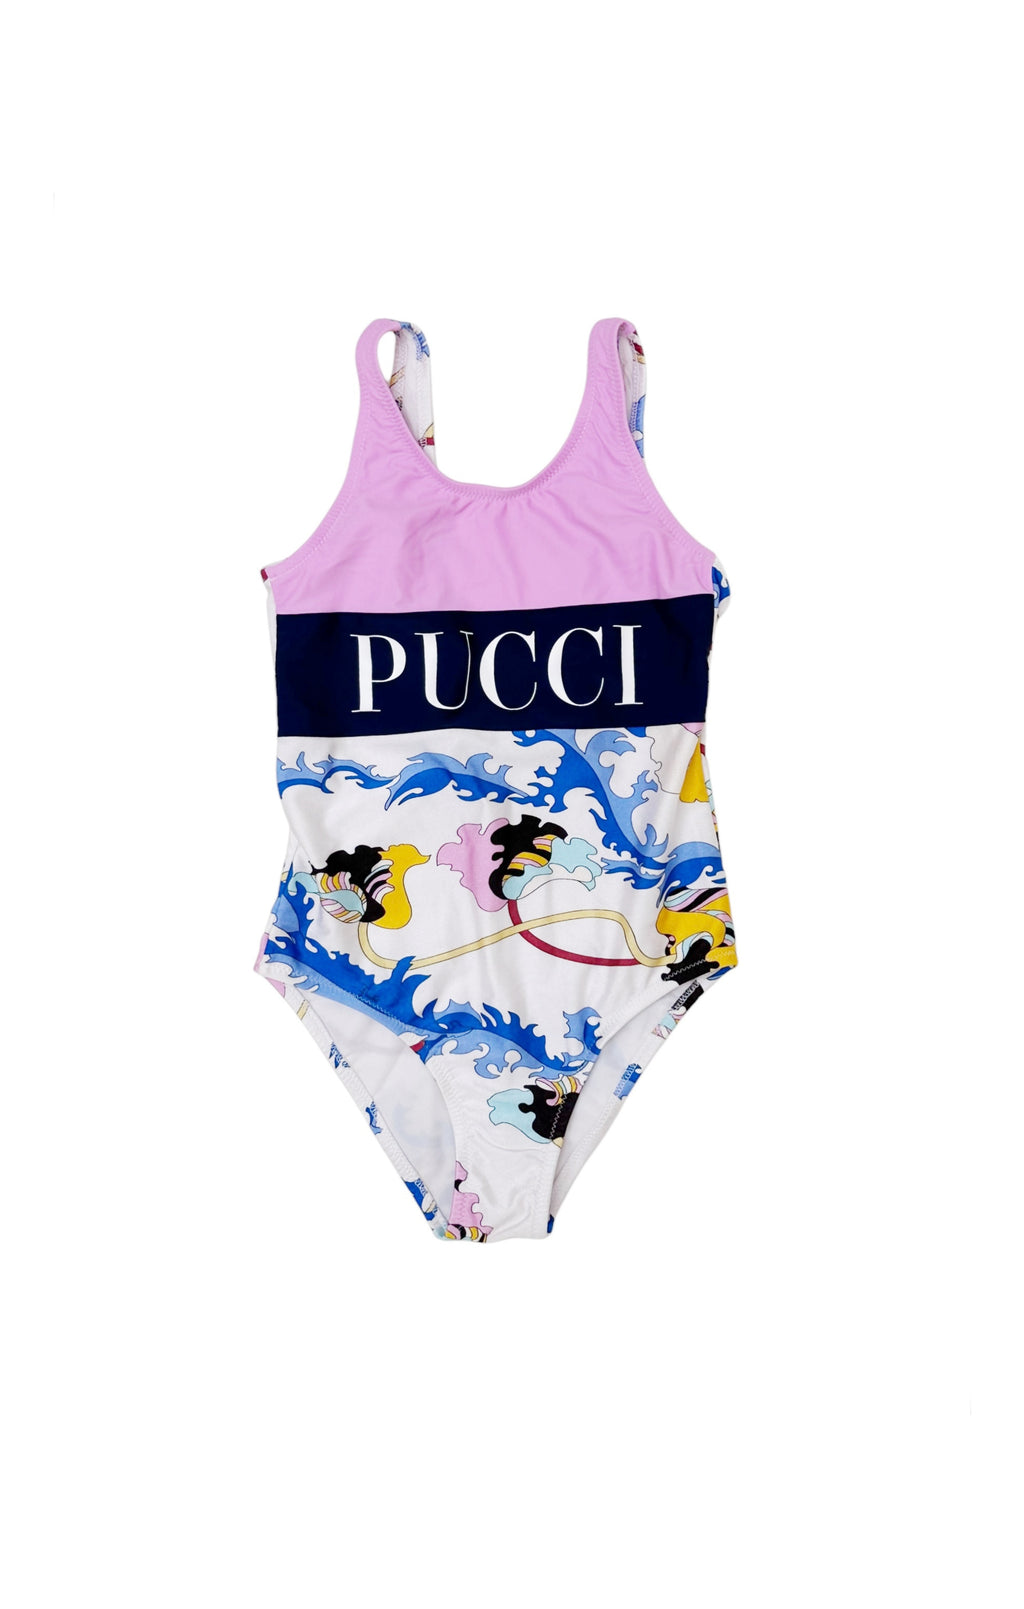 EMILIO PUCCI (RARE) Swimsuit Size: No size tags, fits like 5-6 Years